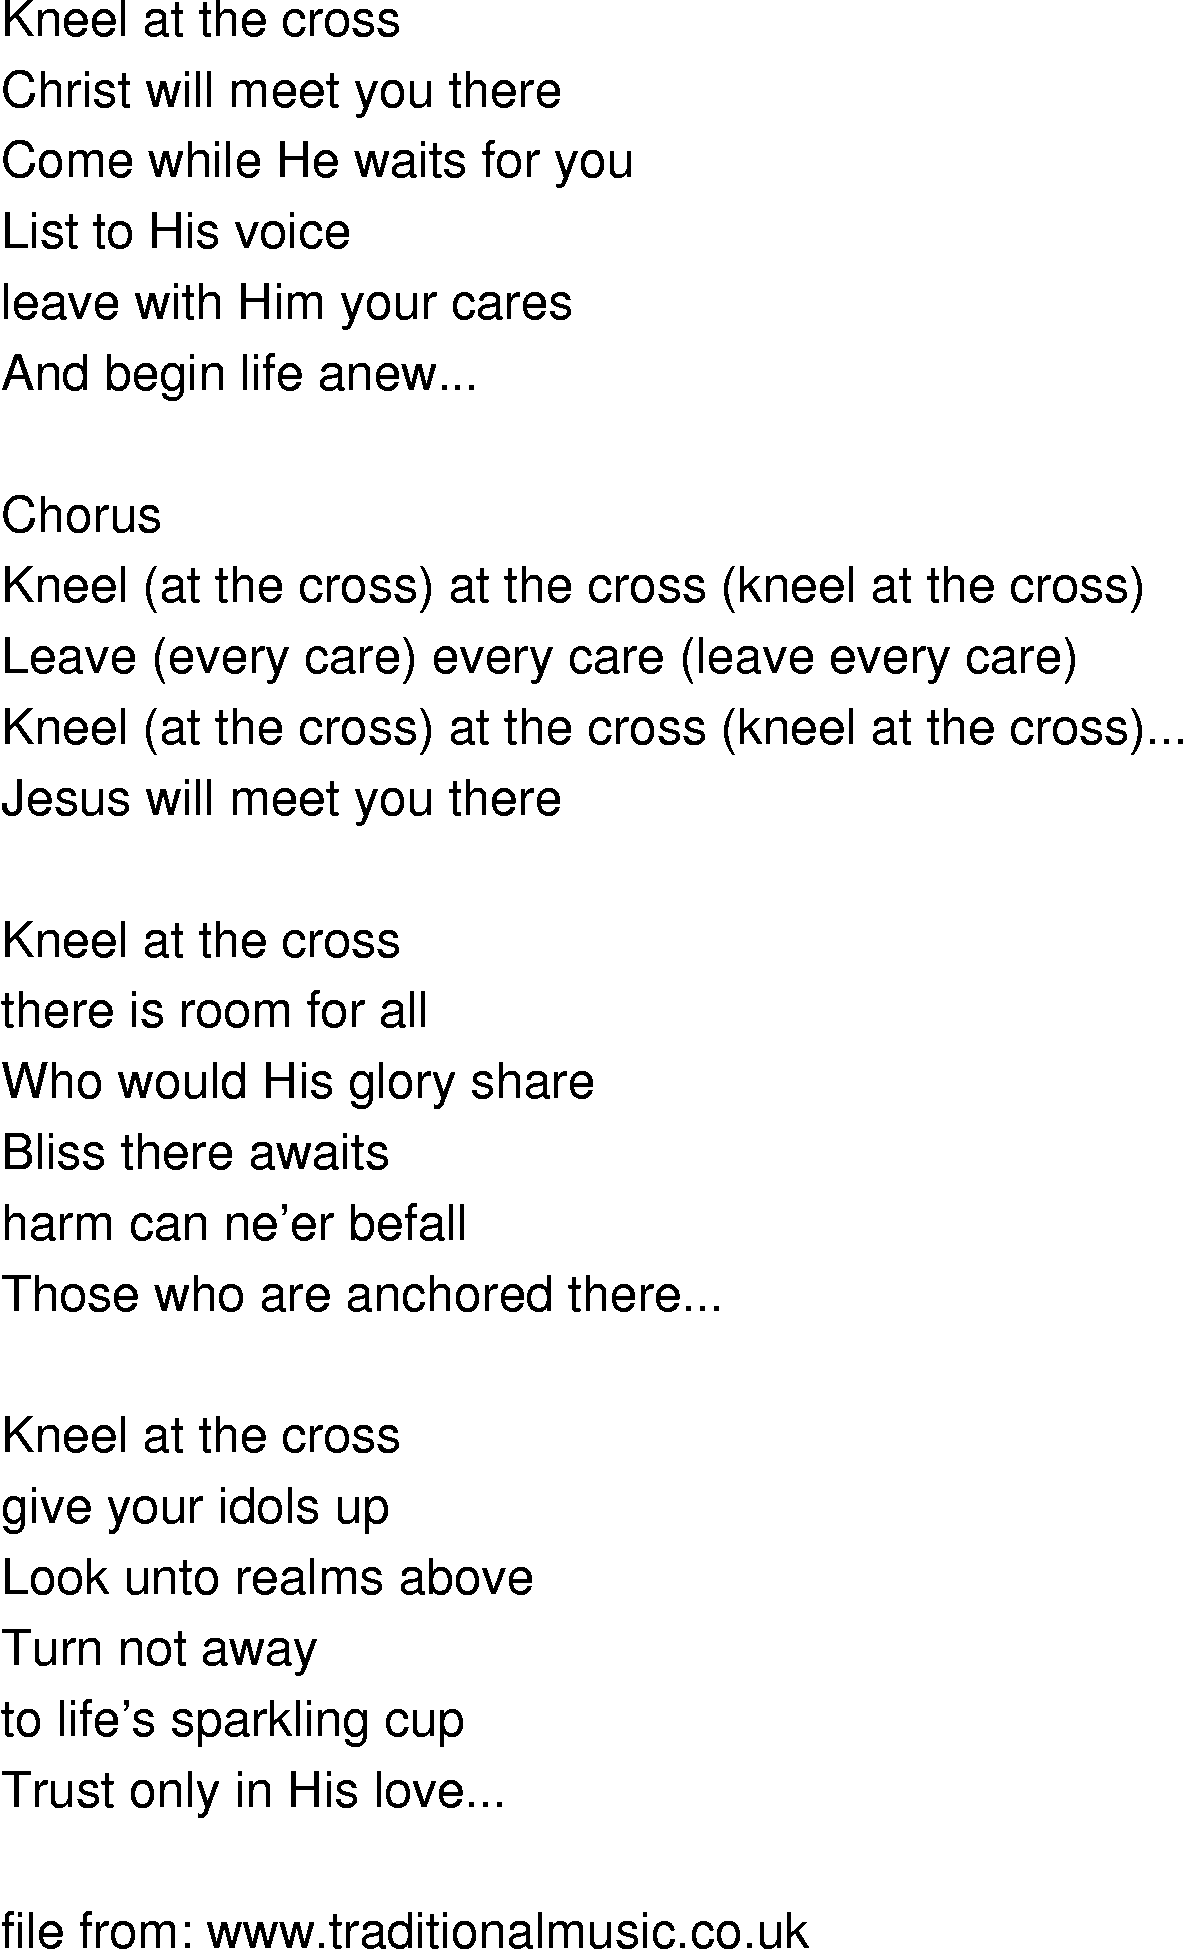 Old-Time (oldtimey) Song Lyrics - kneel at the cross